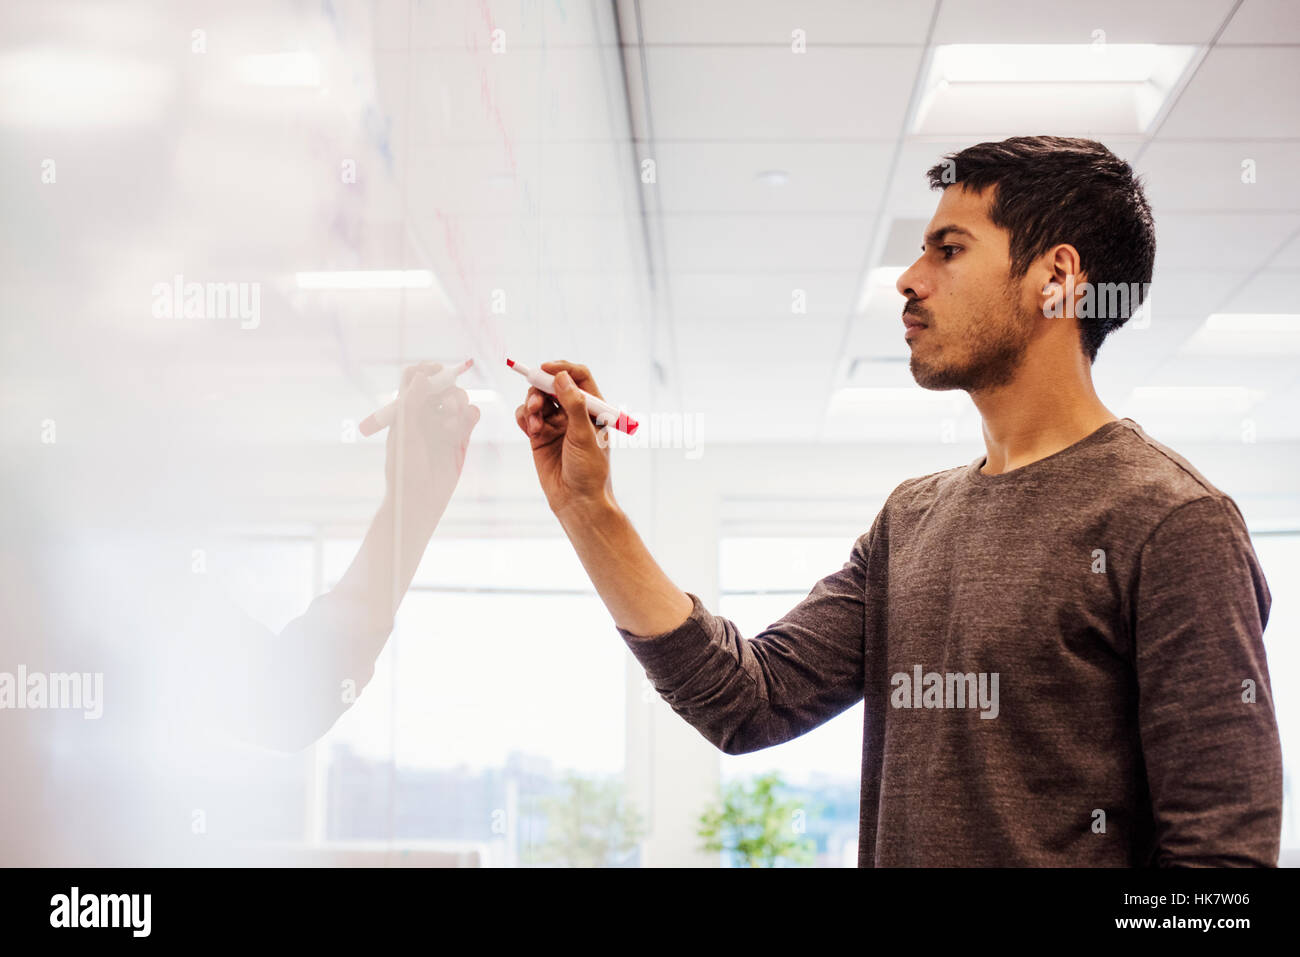 A man standing in a classroom writing on a whiteboard. Stock Photo